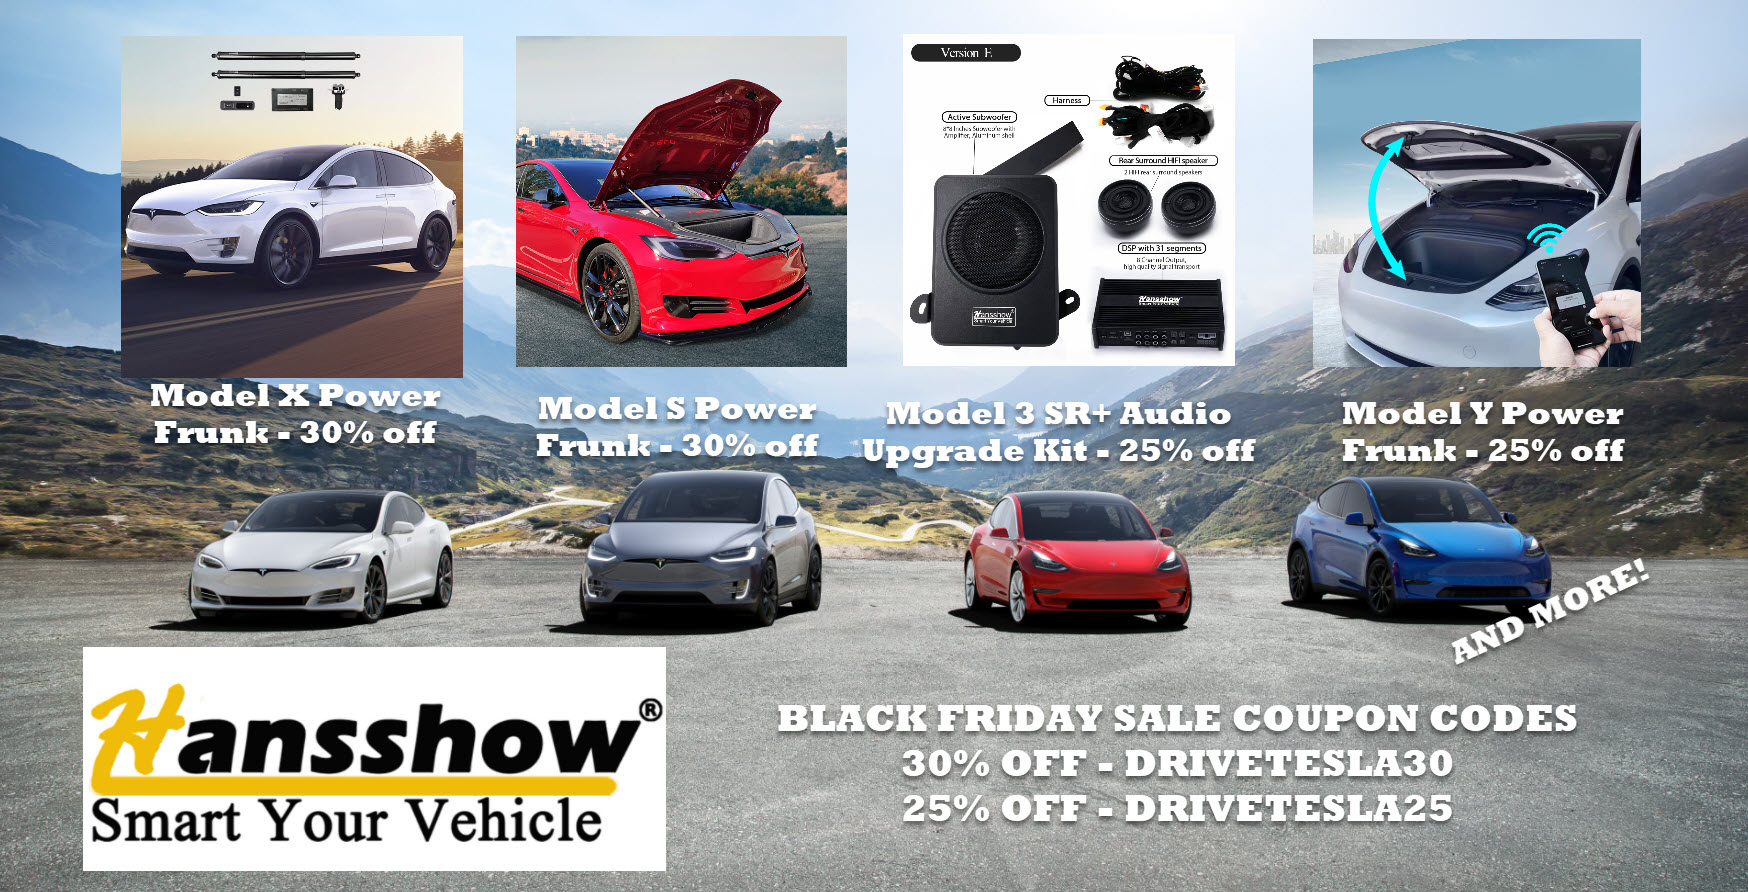 Hansshow Black Friday coupons save up to 30 [Deal] Drive Tesla